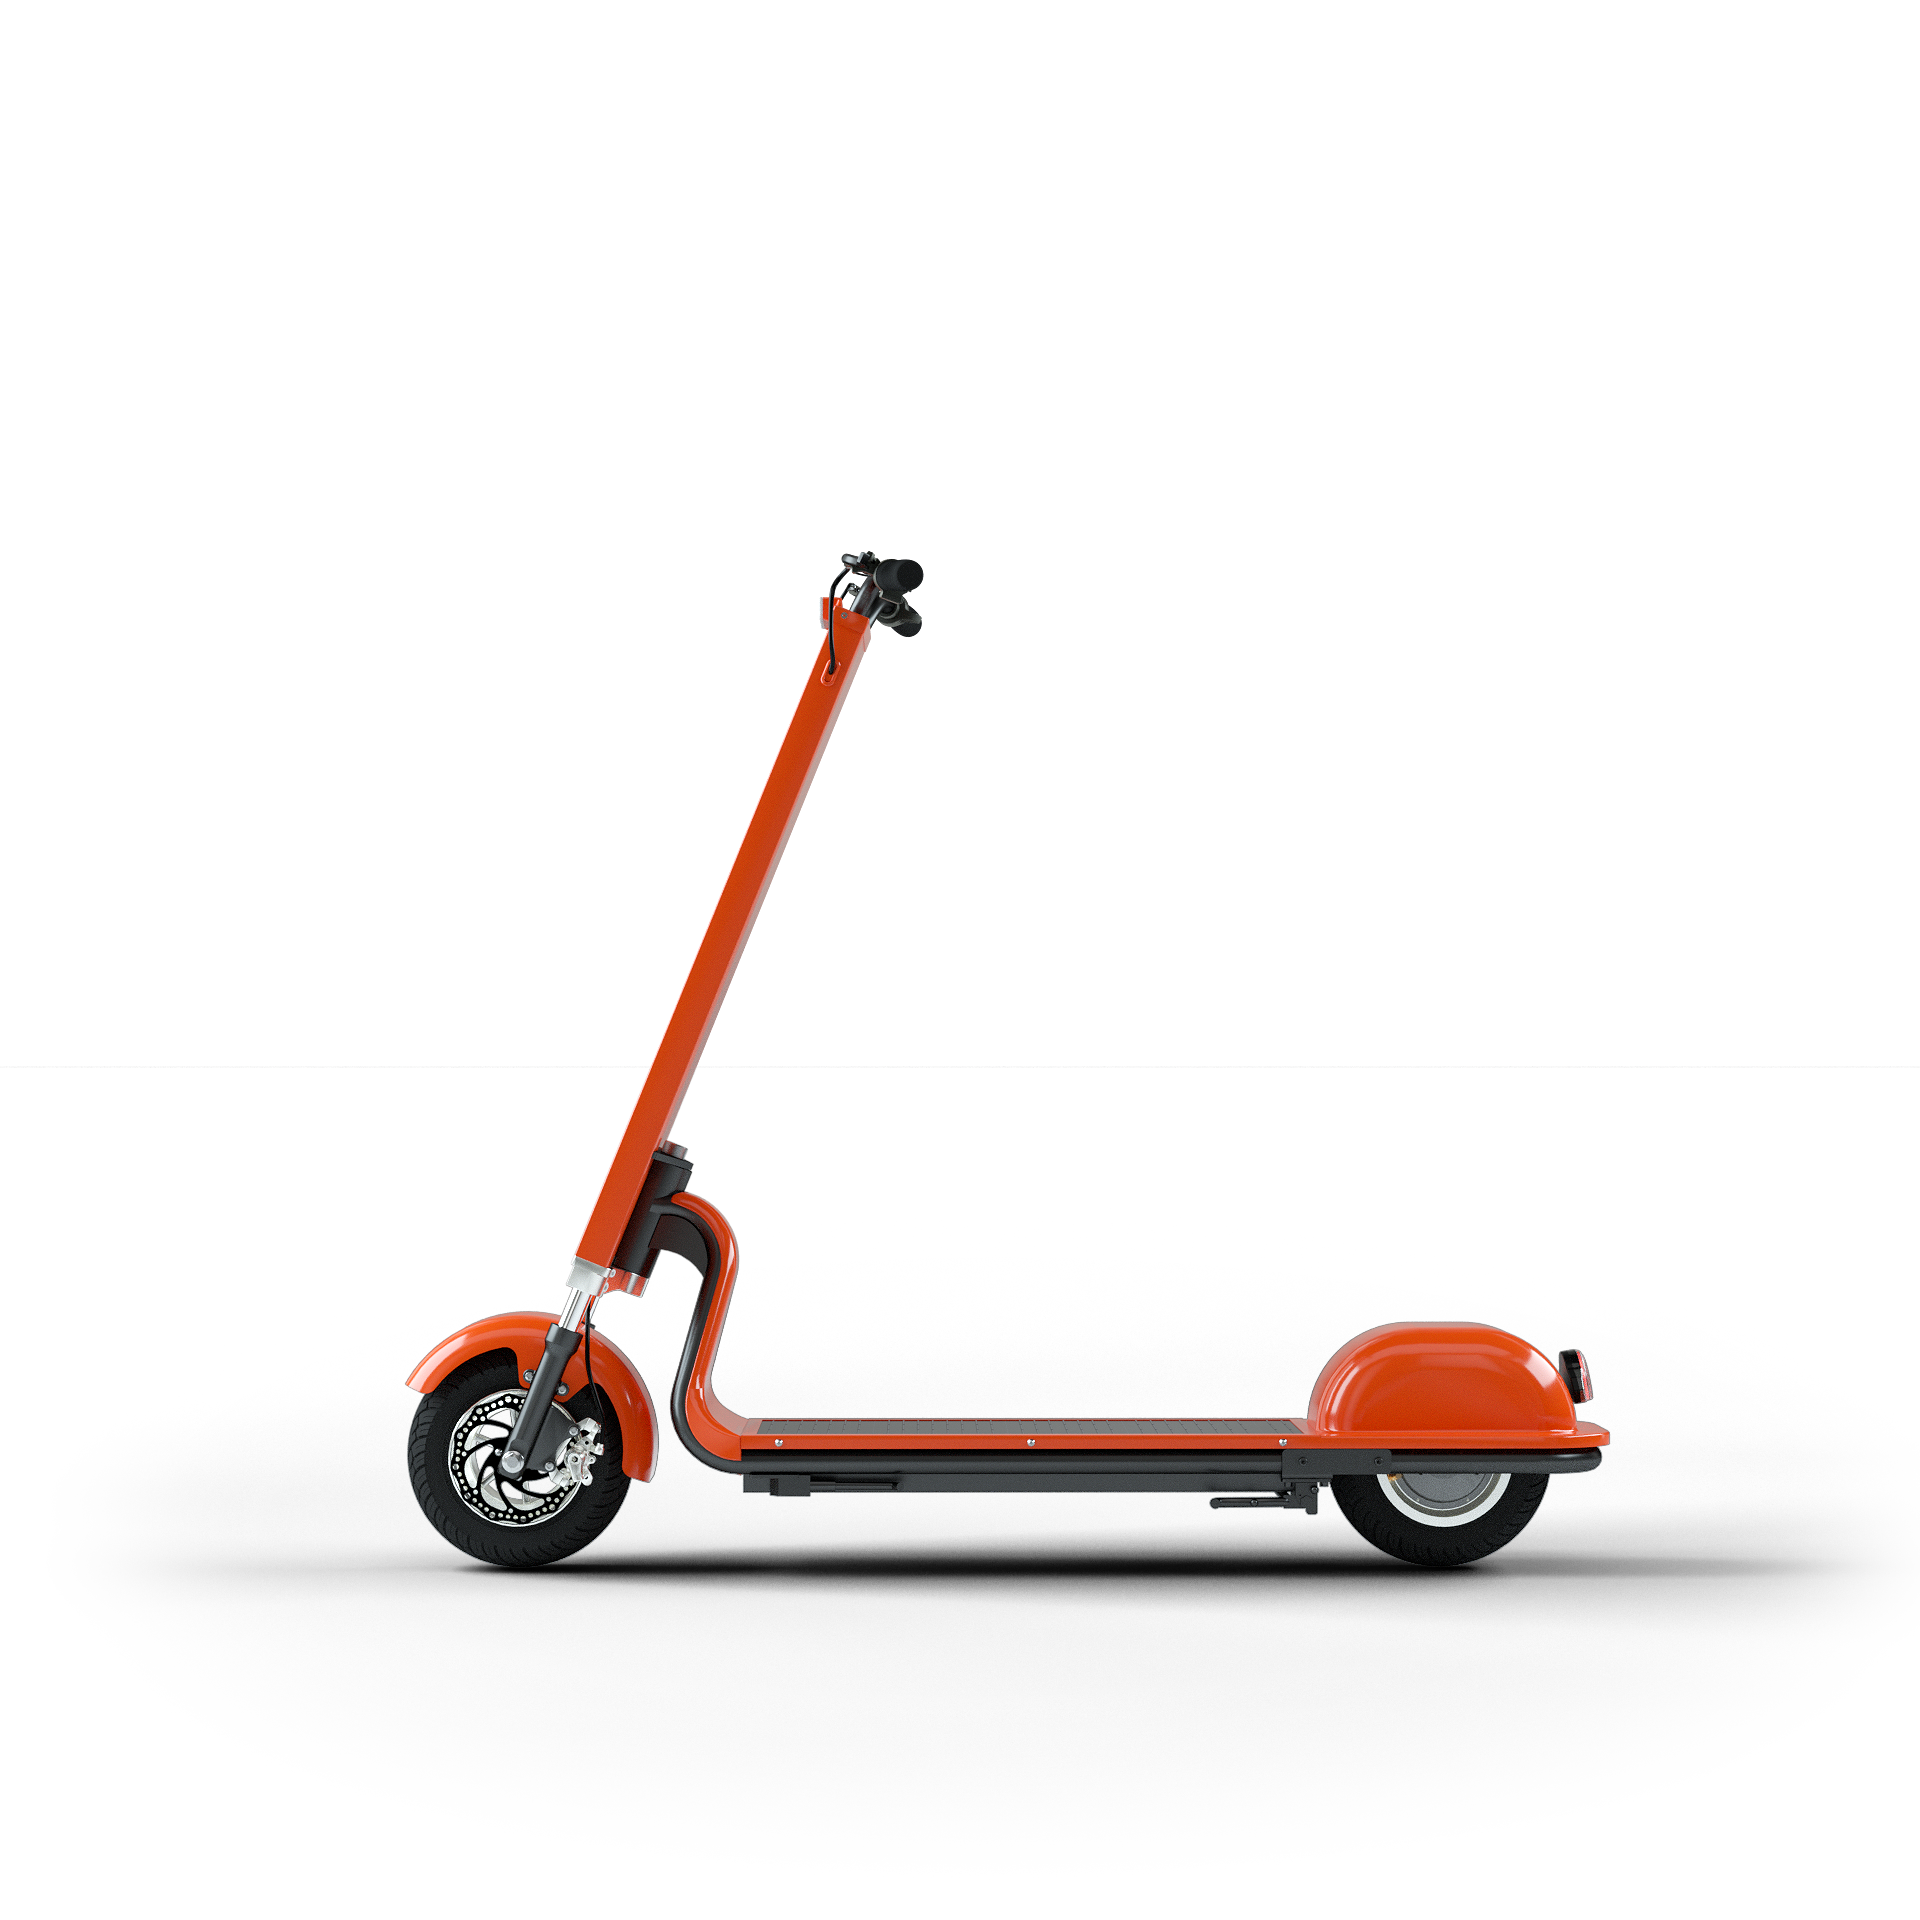 S80 Solar Powered Electric Scooter